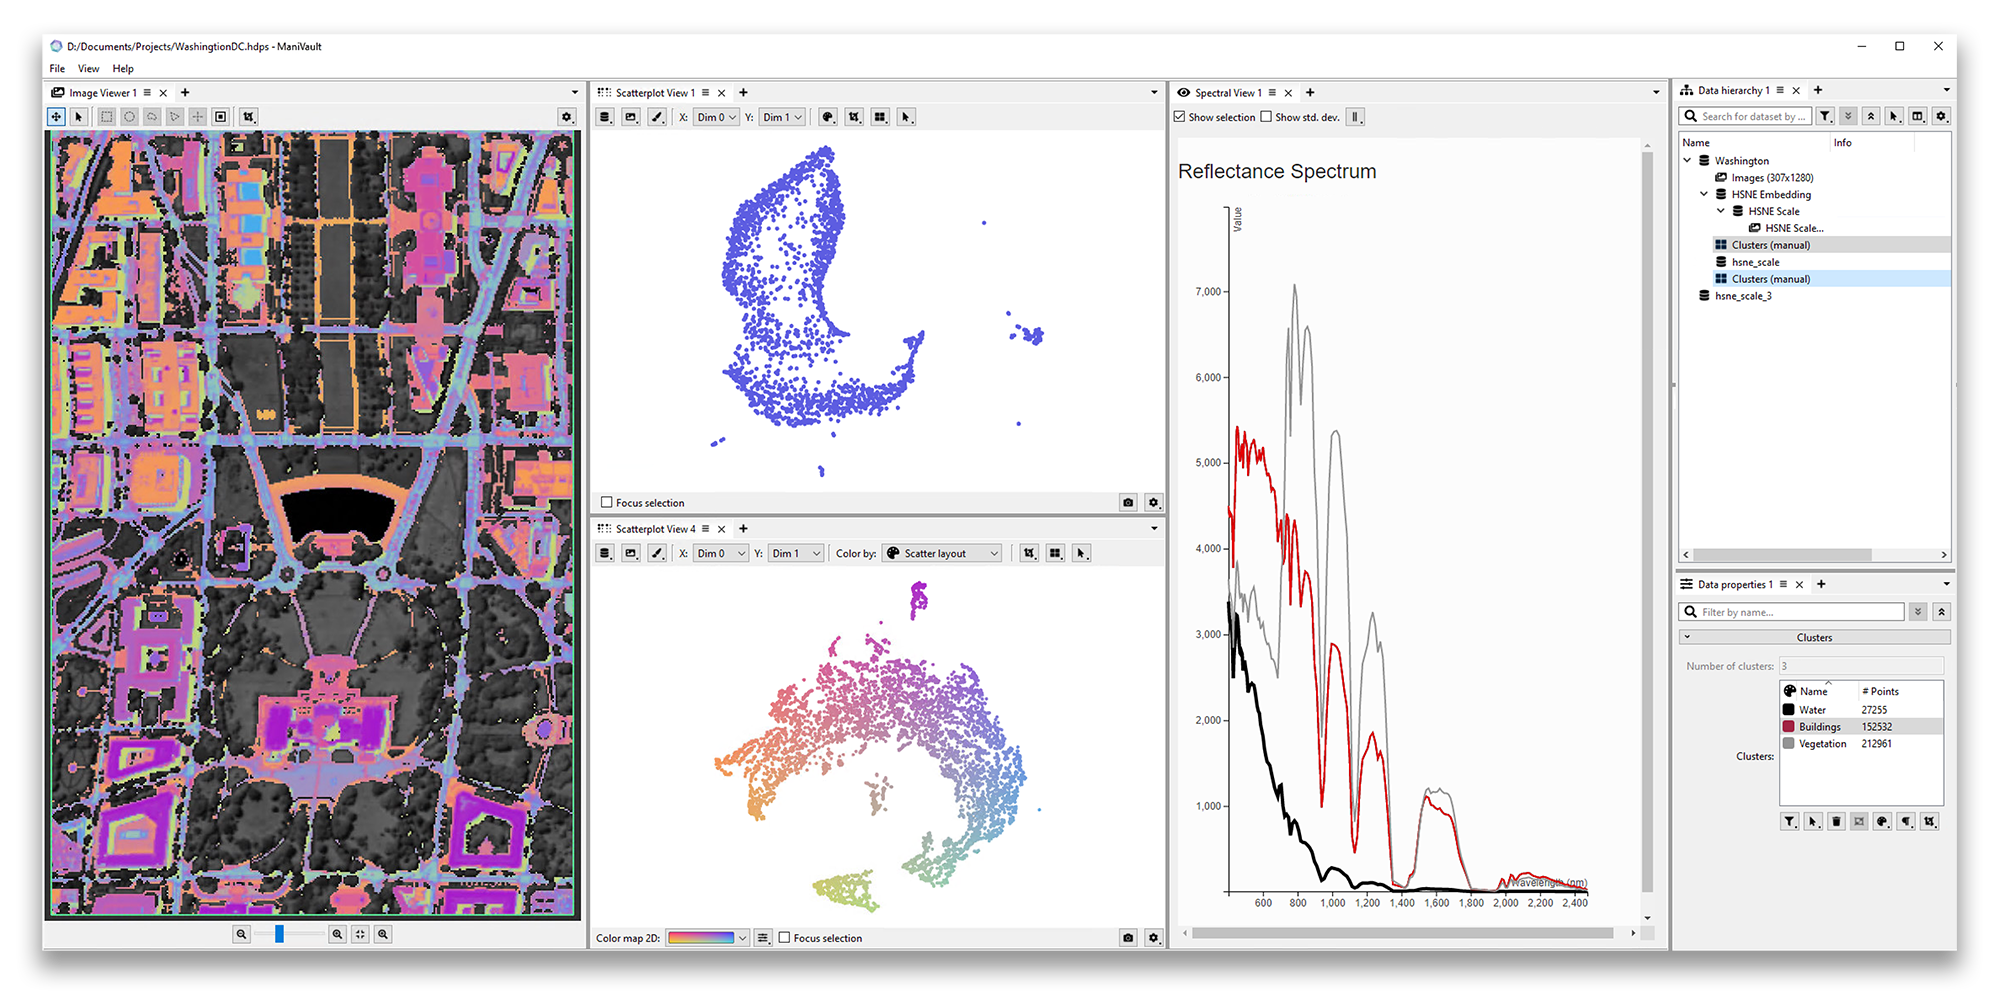 ManiVault: A Flexible and Extensible Visual Analytics Framework for High-Dimensional Data teaser image